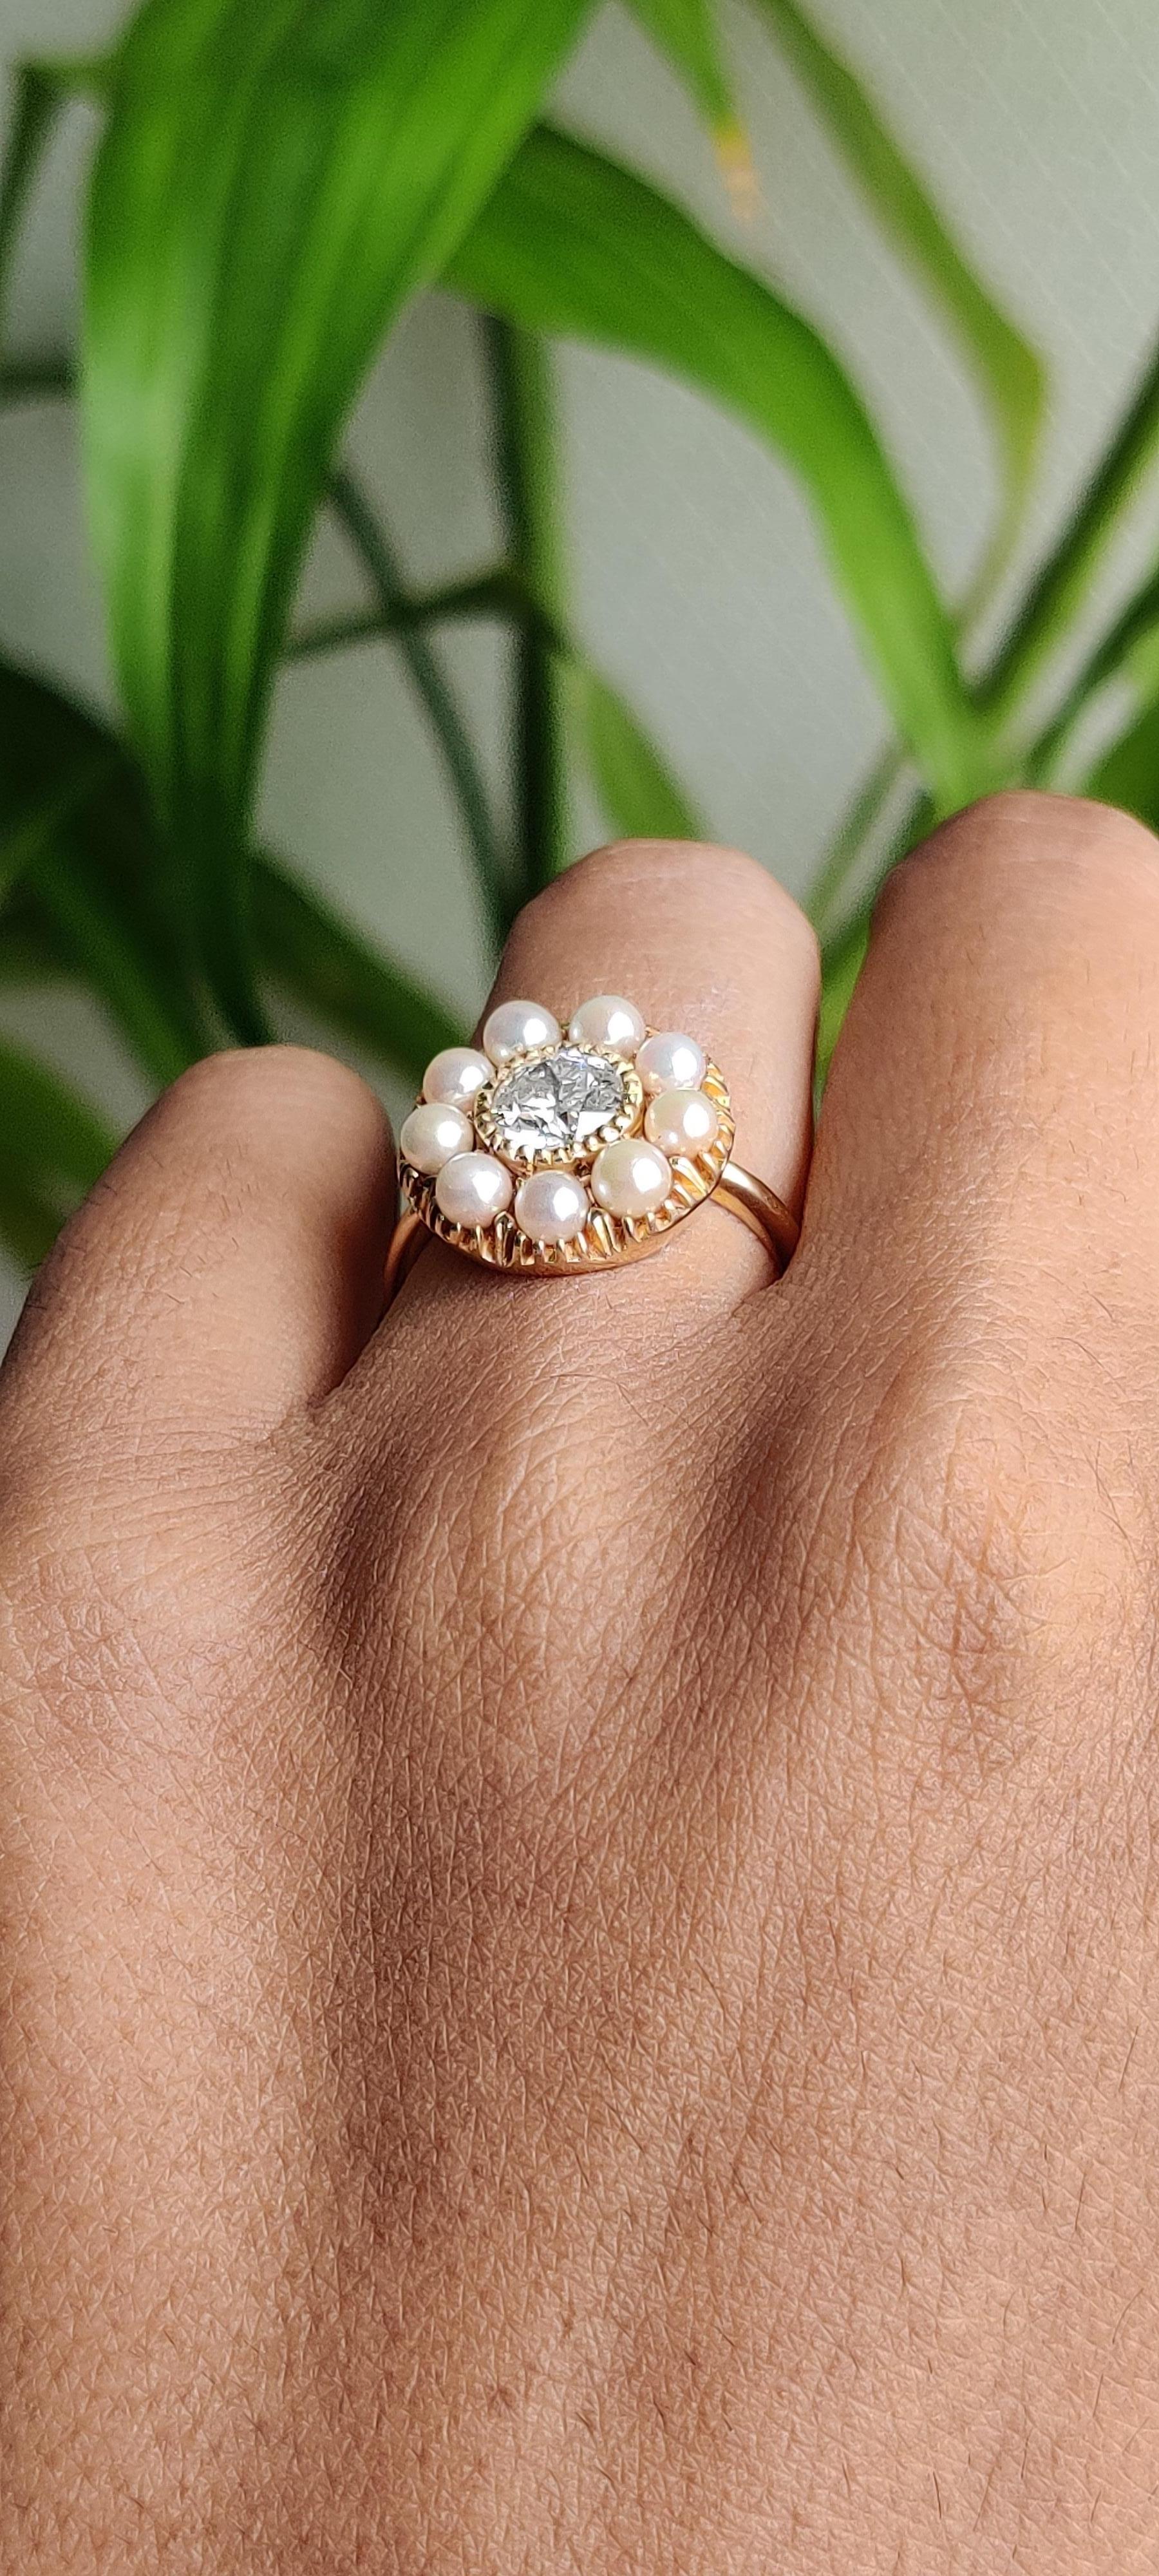 Natural Old Mine Cut Diamond Ring with Pearls in 18K Gold For Sale 2